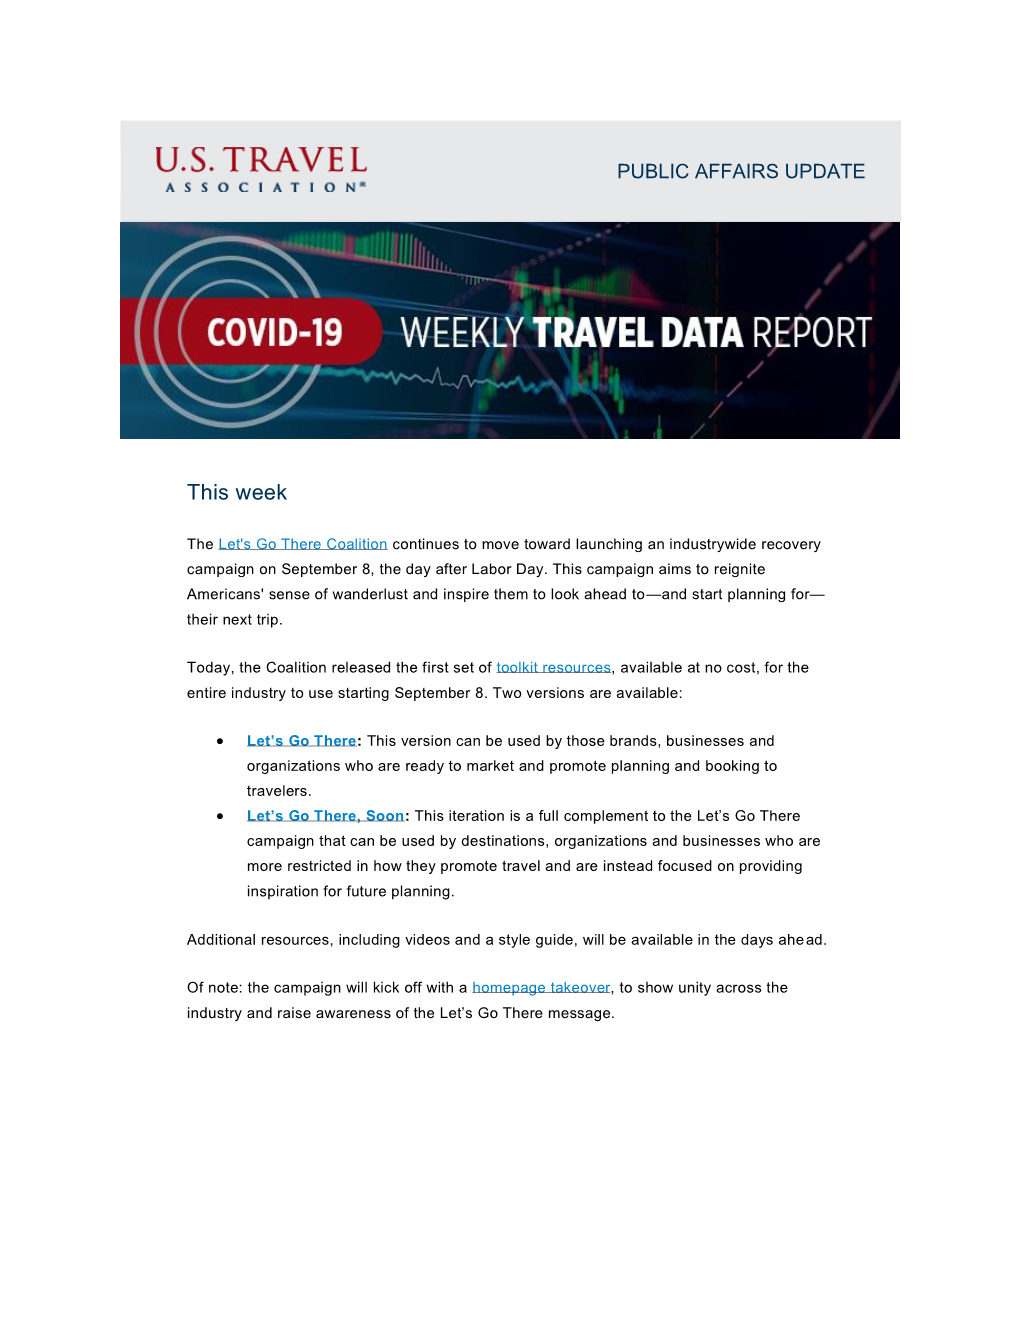 COVID-19 Travel Industry Research Wepage